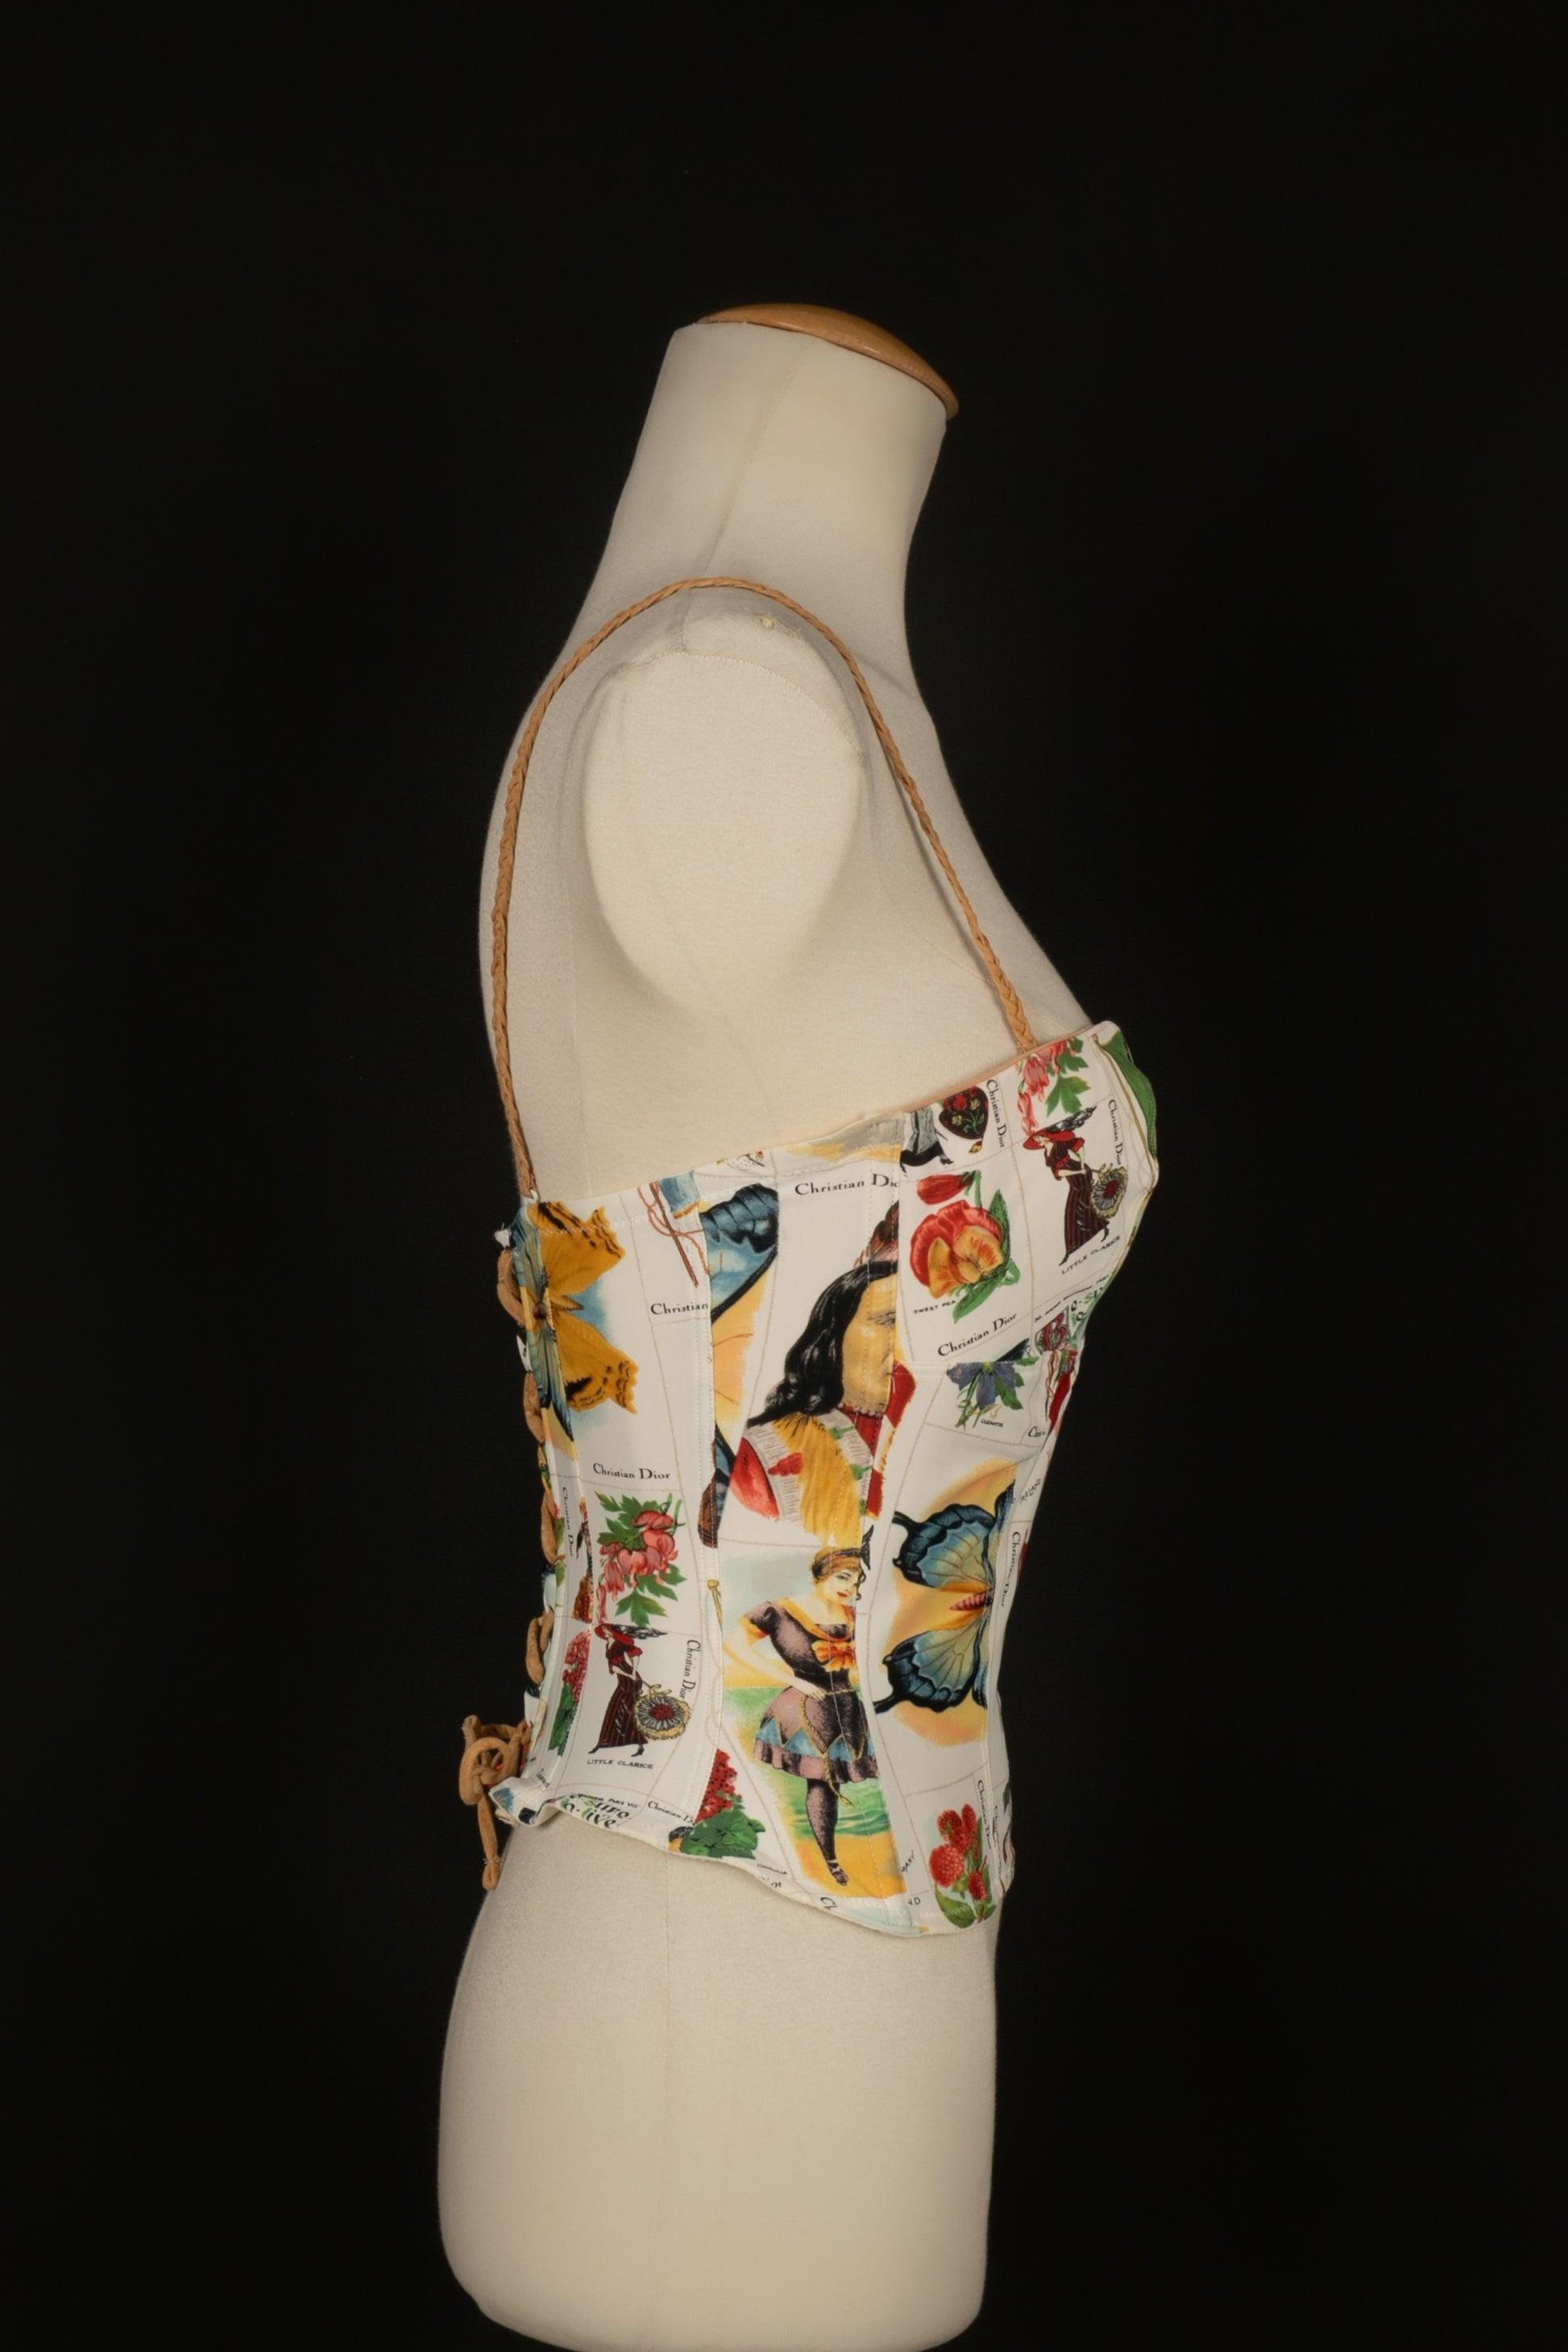 Dior - Printed bustier top with a white background. Indicated size 90C. Spring-Summer 2002 Ready-to-Wear Collection under the direction of John Galliano.

Additional information:
Condition: Very good condition
Dimensions: Chest: 33 cm
Waist: 30